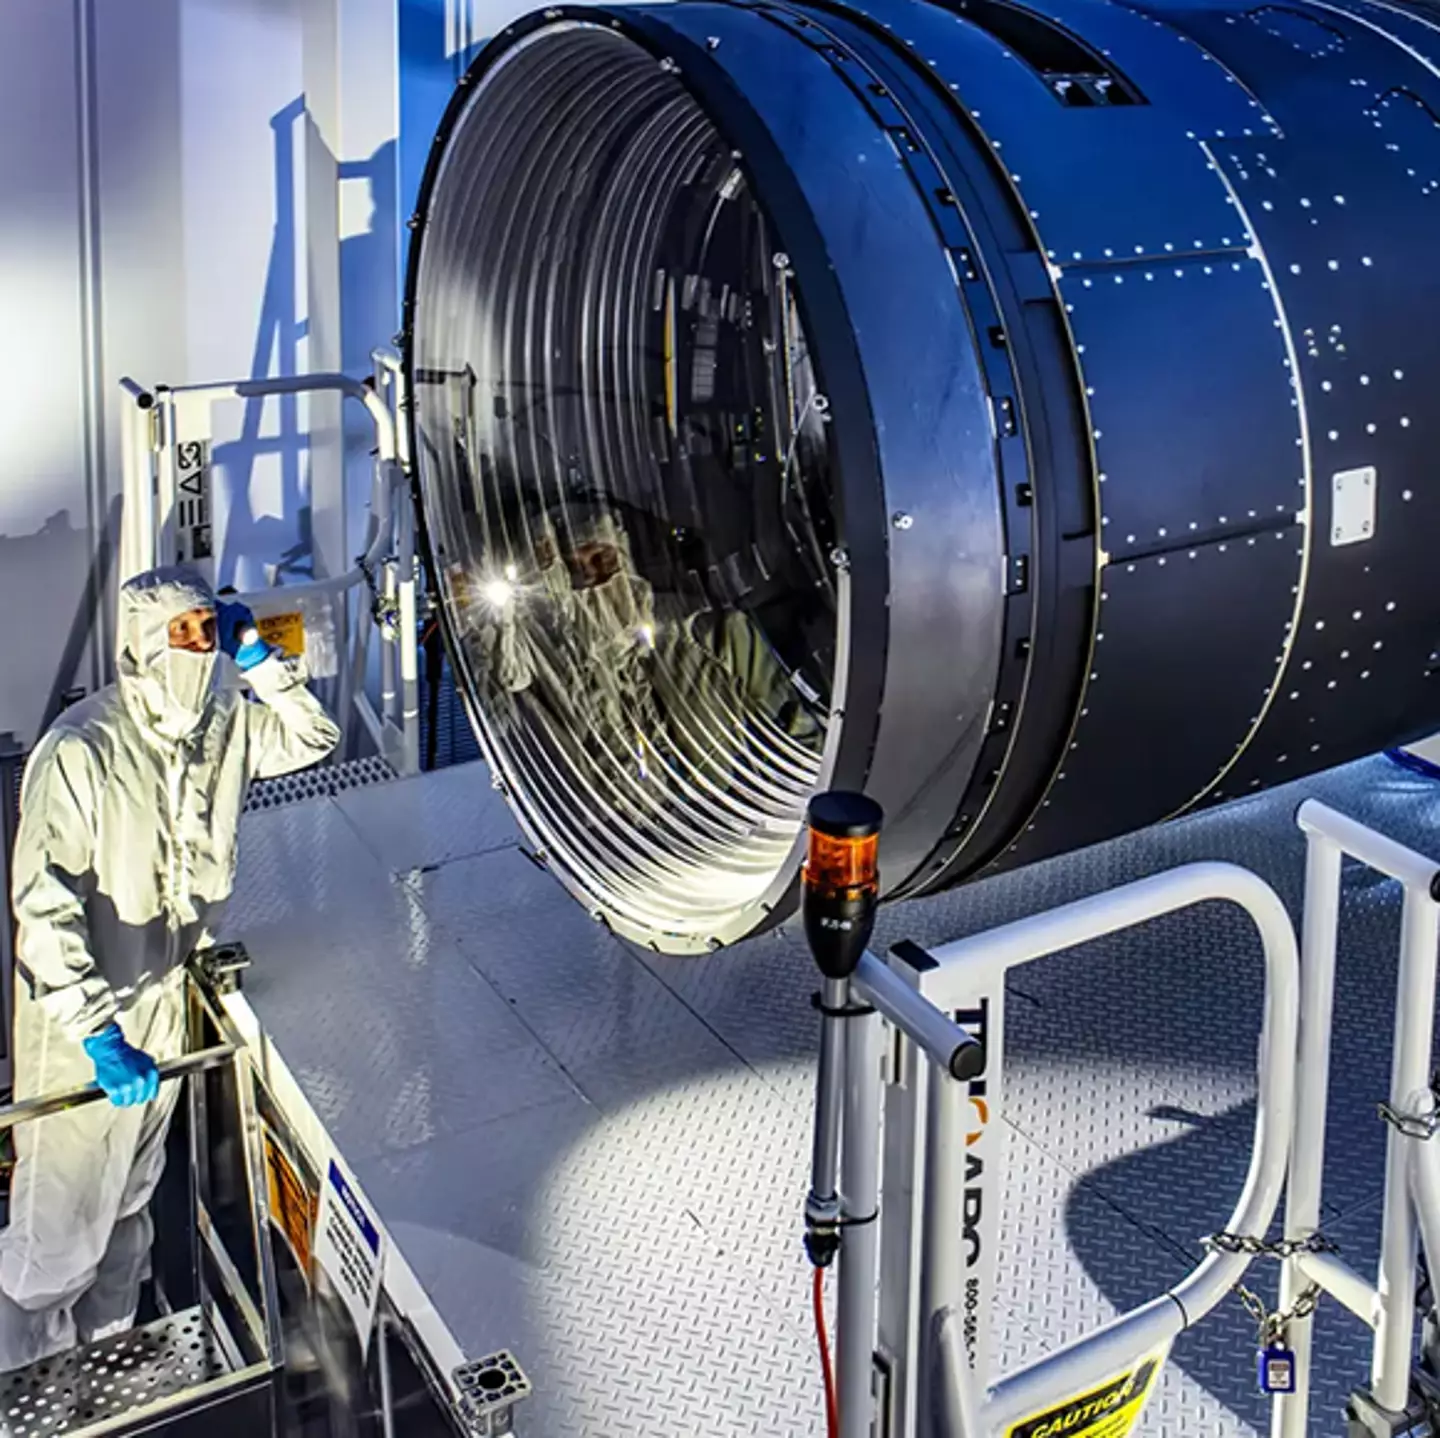 The world's largest digital camera is ready to investigate the dark universe